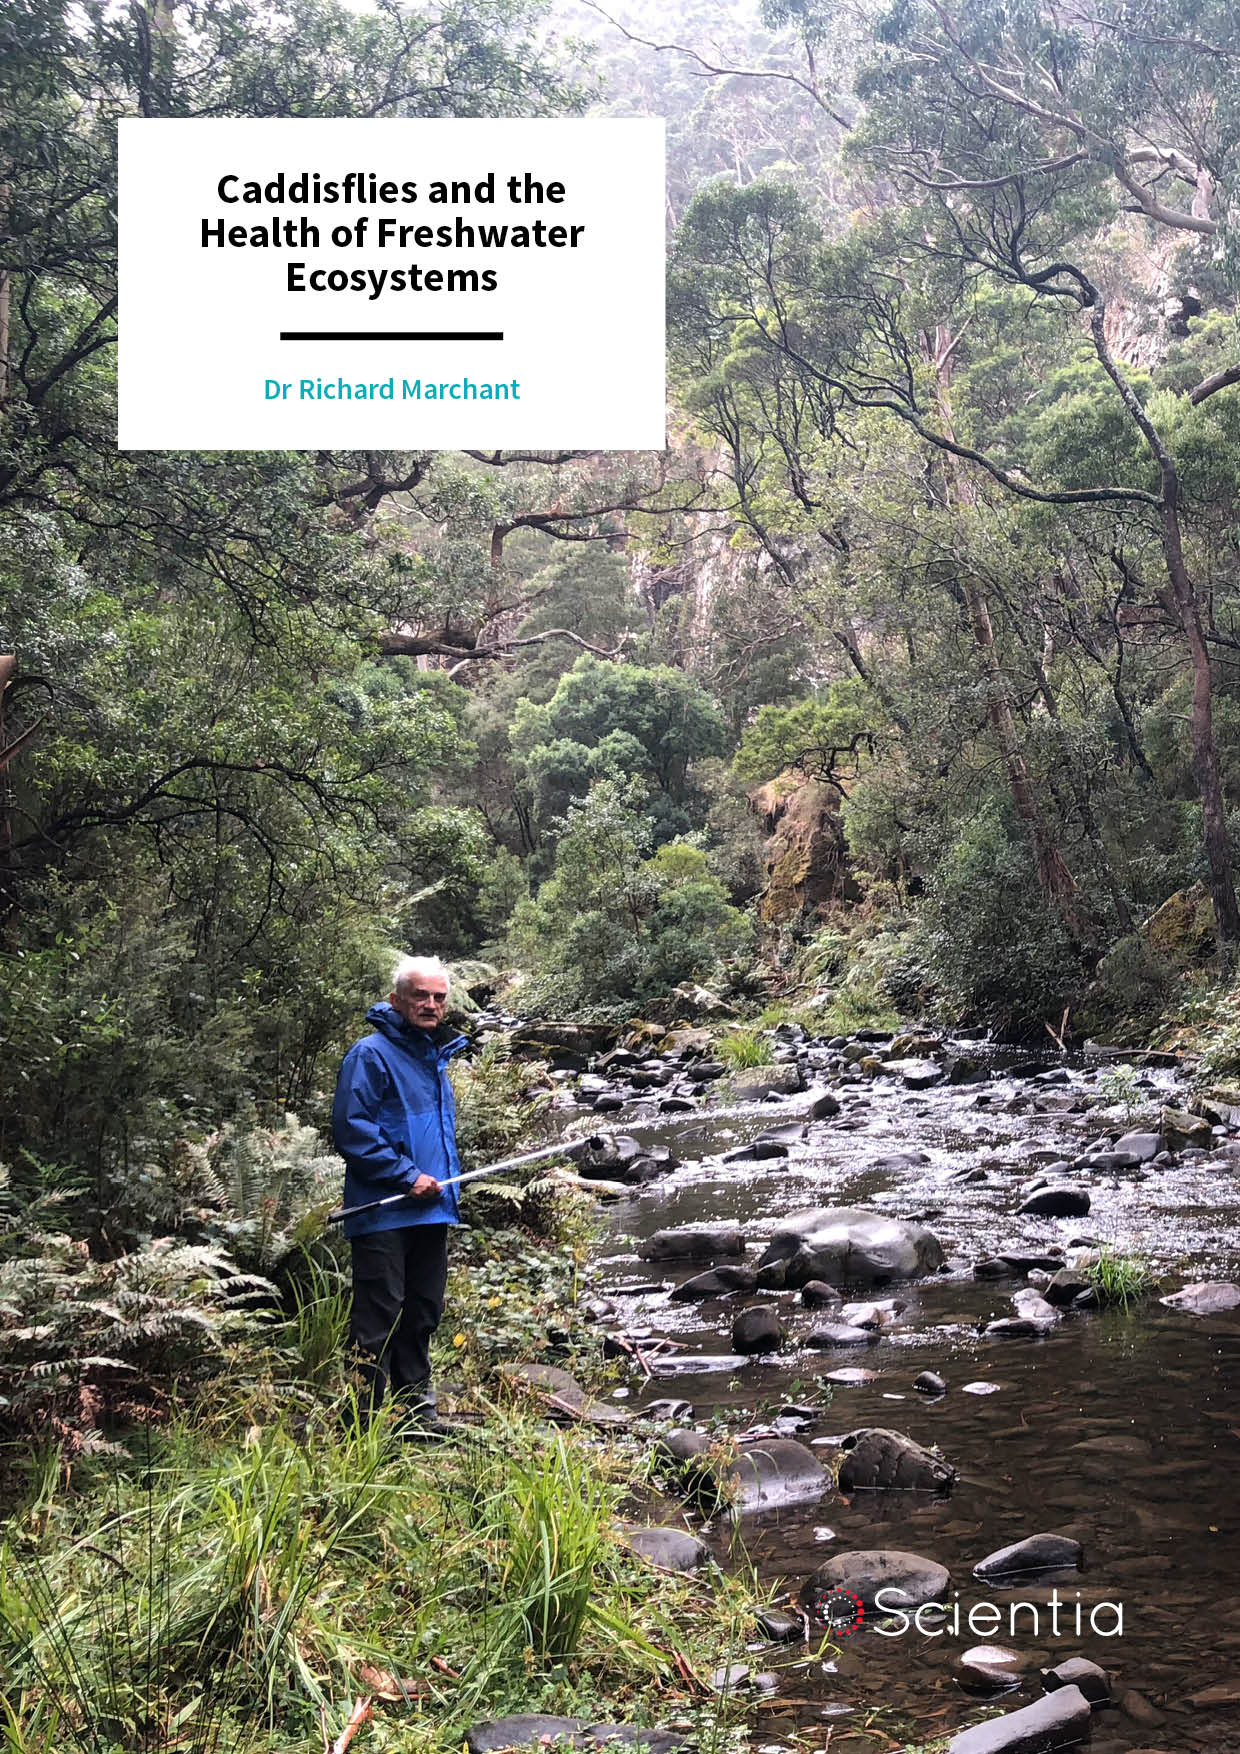 Dr Richard Marchant | Caddisflies and the Health of Freshwater Ecosystems